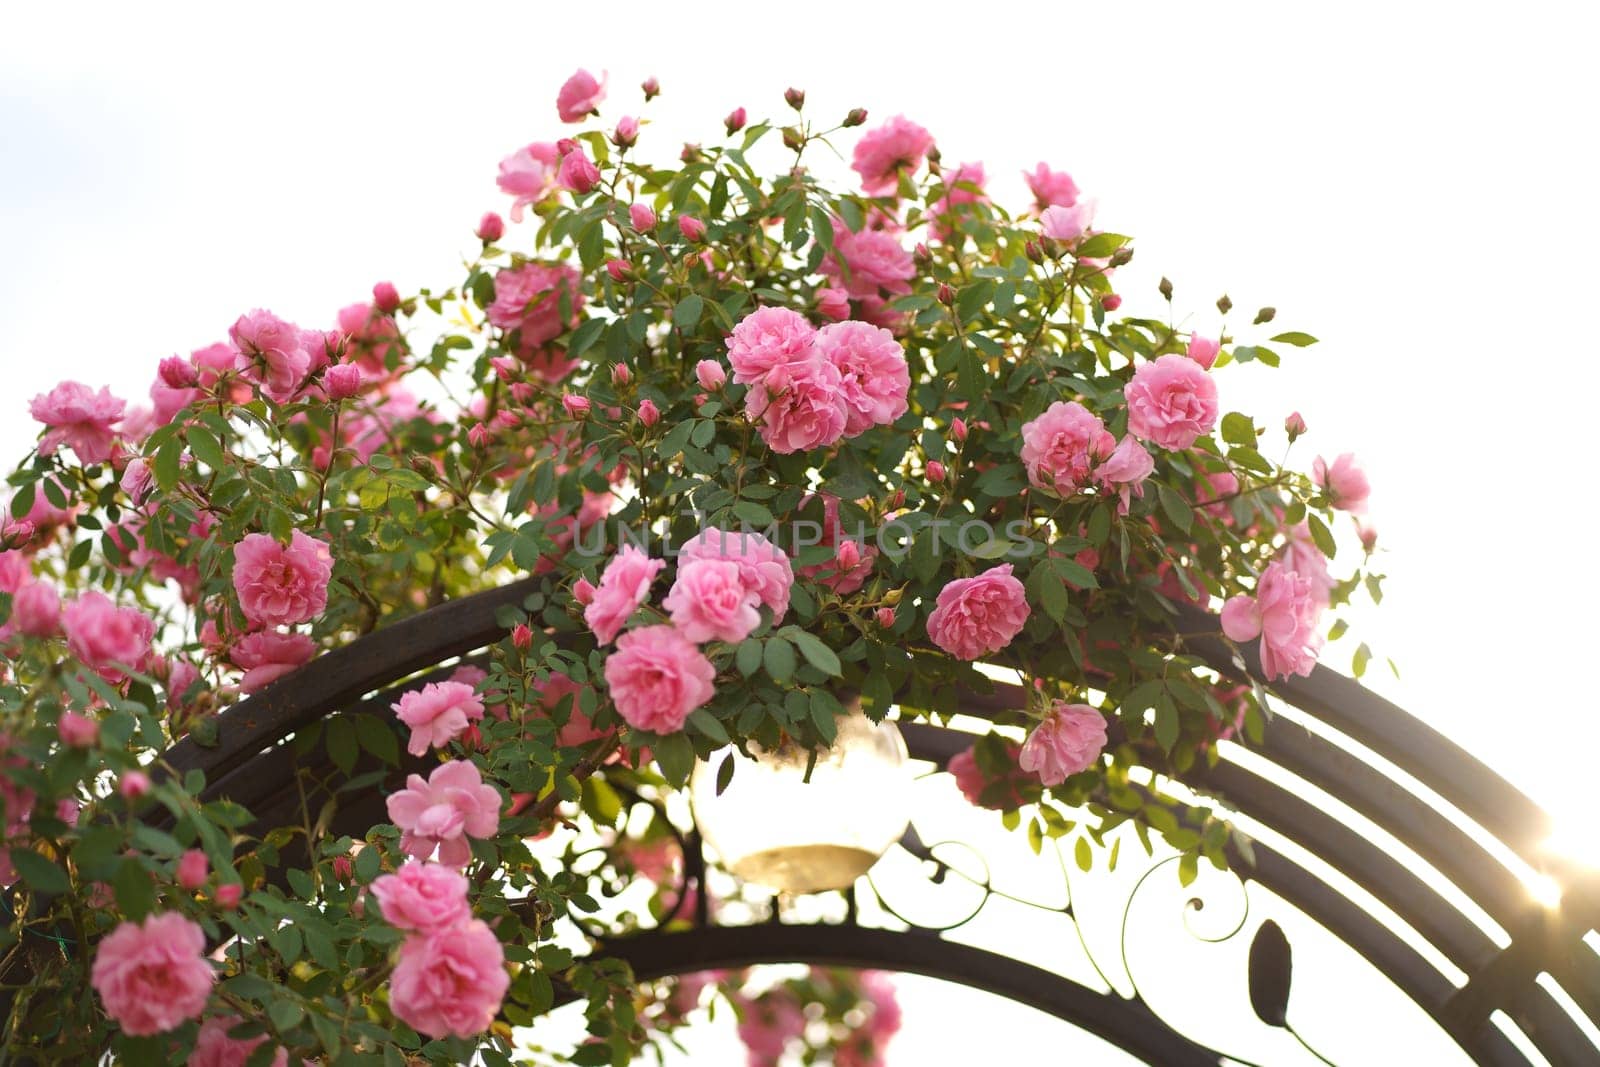 Rose curly, climbing grows on a metal arch, support. Vegetation for landscape design. Fence decor in a private courtyard